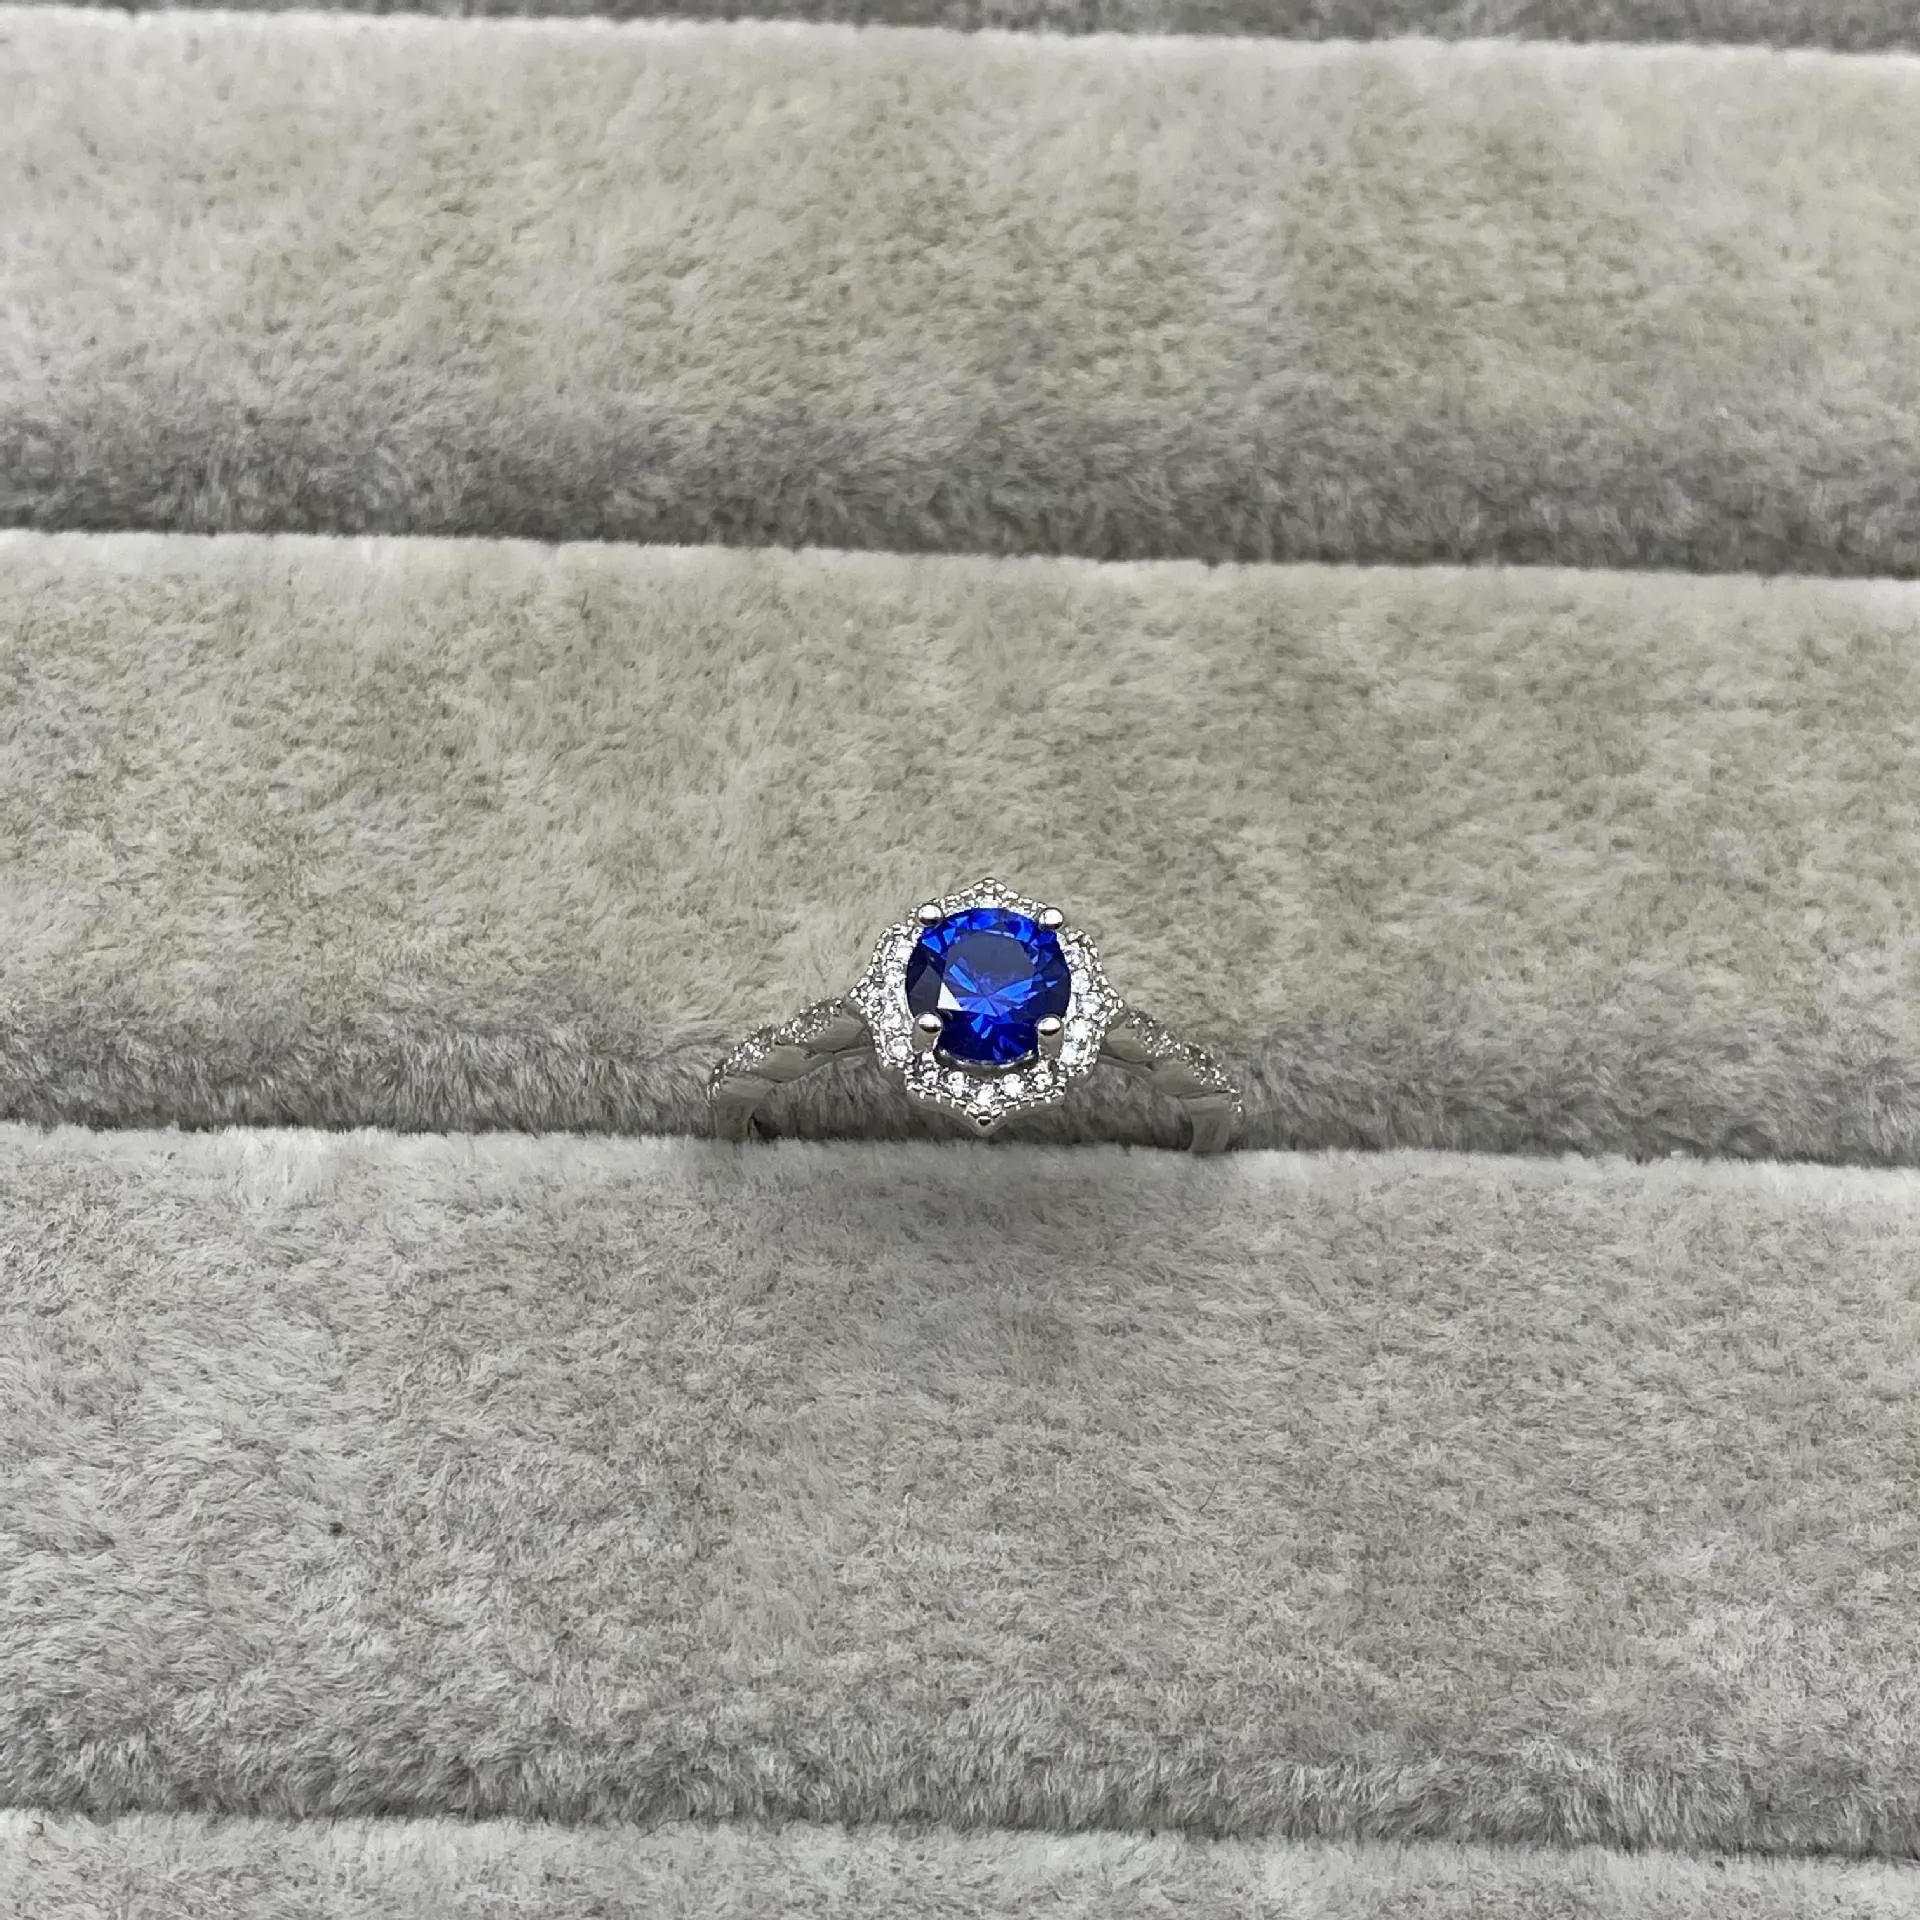 2023 New S925 Silver Deluxe Oval Blue Pagoda Stone Set Diamond Ringエレガントパーソナリティウェディングリング女性リング